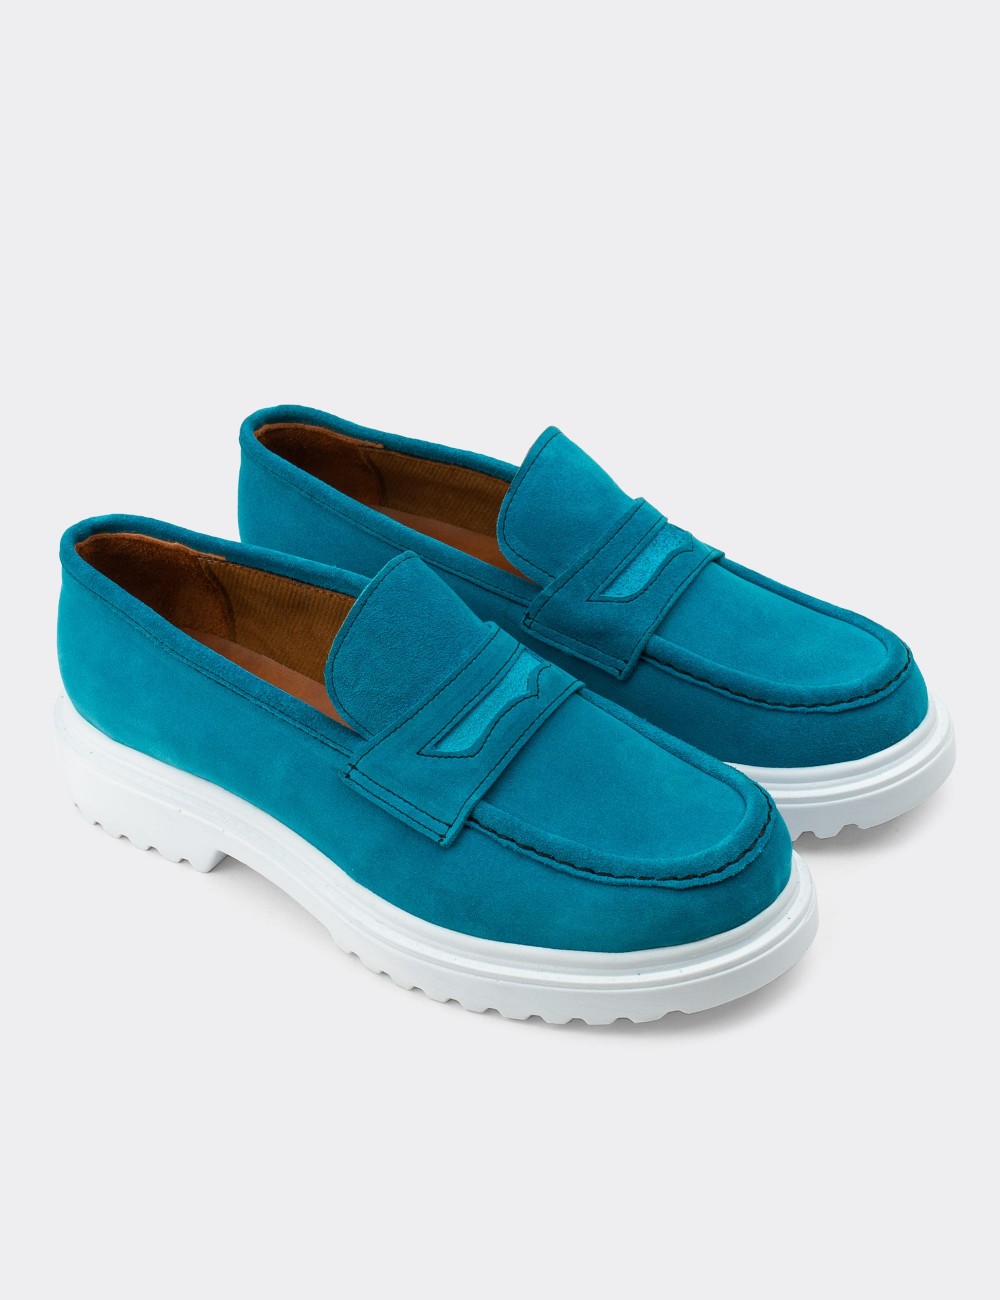 Turquoise Suede Leather Loafers - 01903ZTRKP01